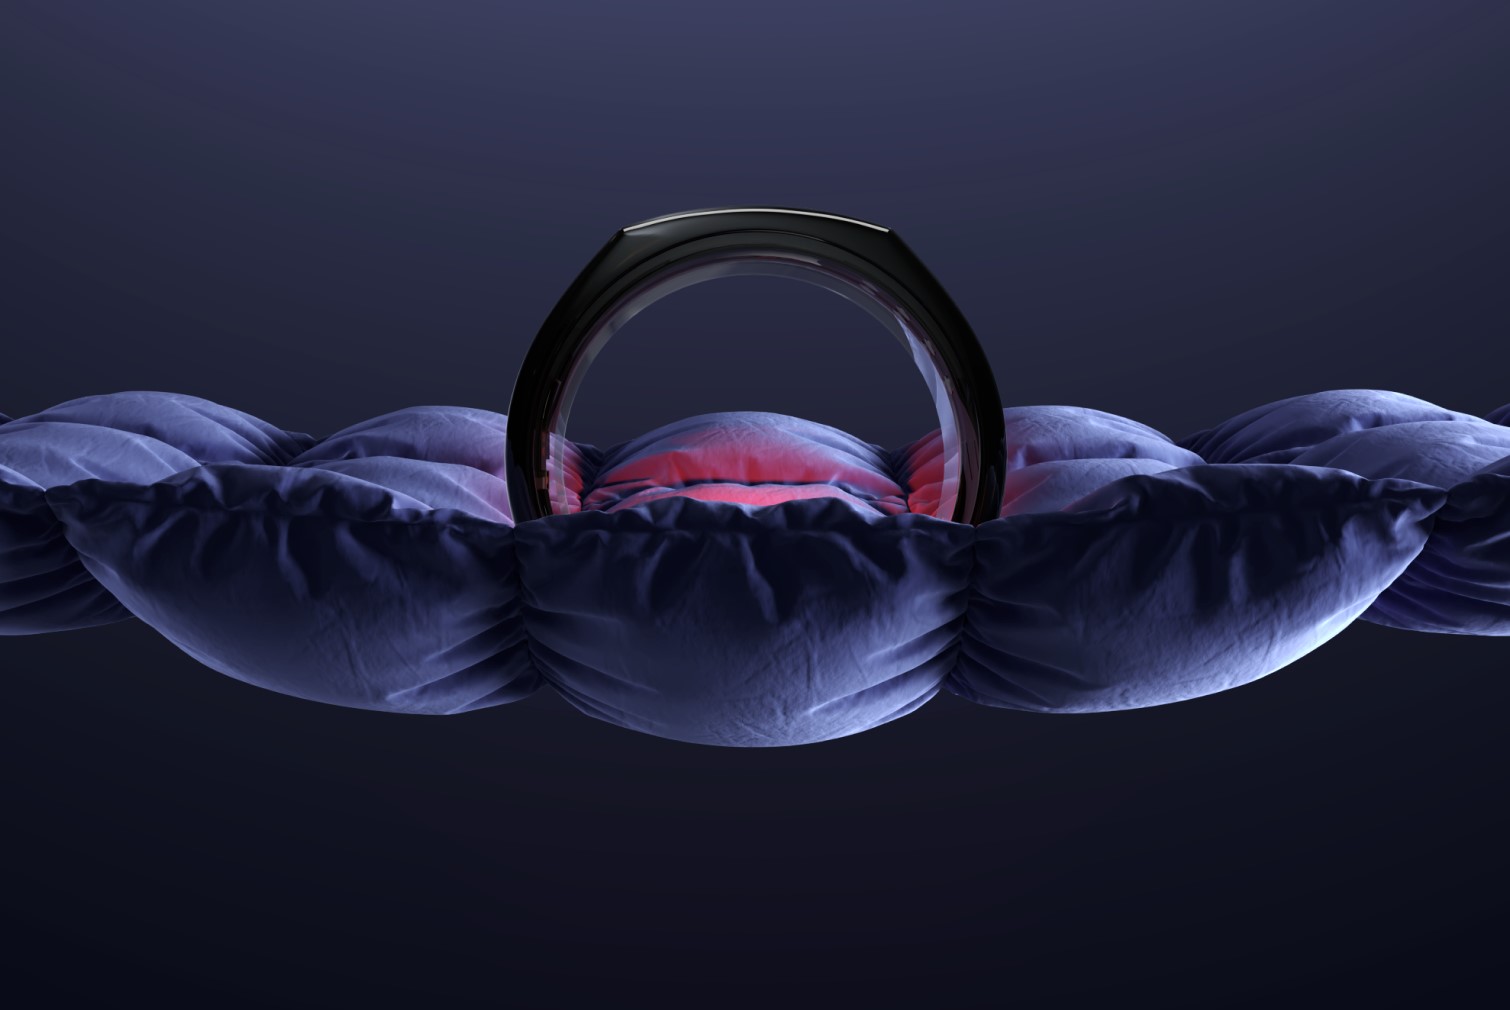 Oura Ring Gen3 gets Blood Oxygen Sensing (SpO2) feature this week